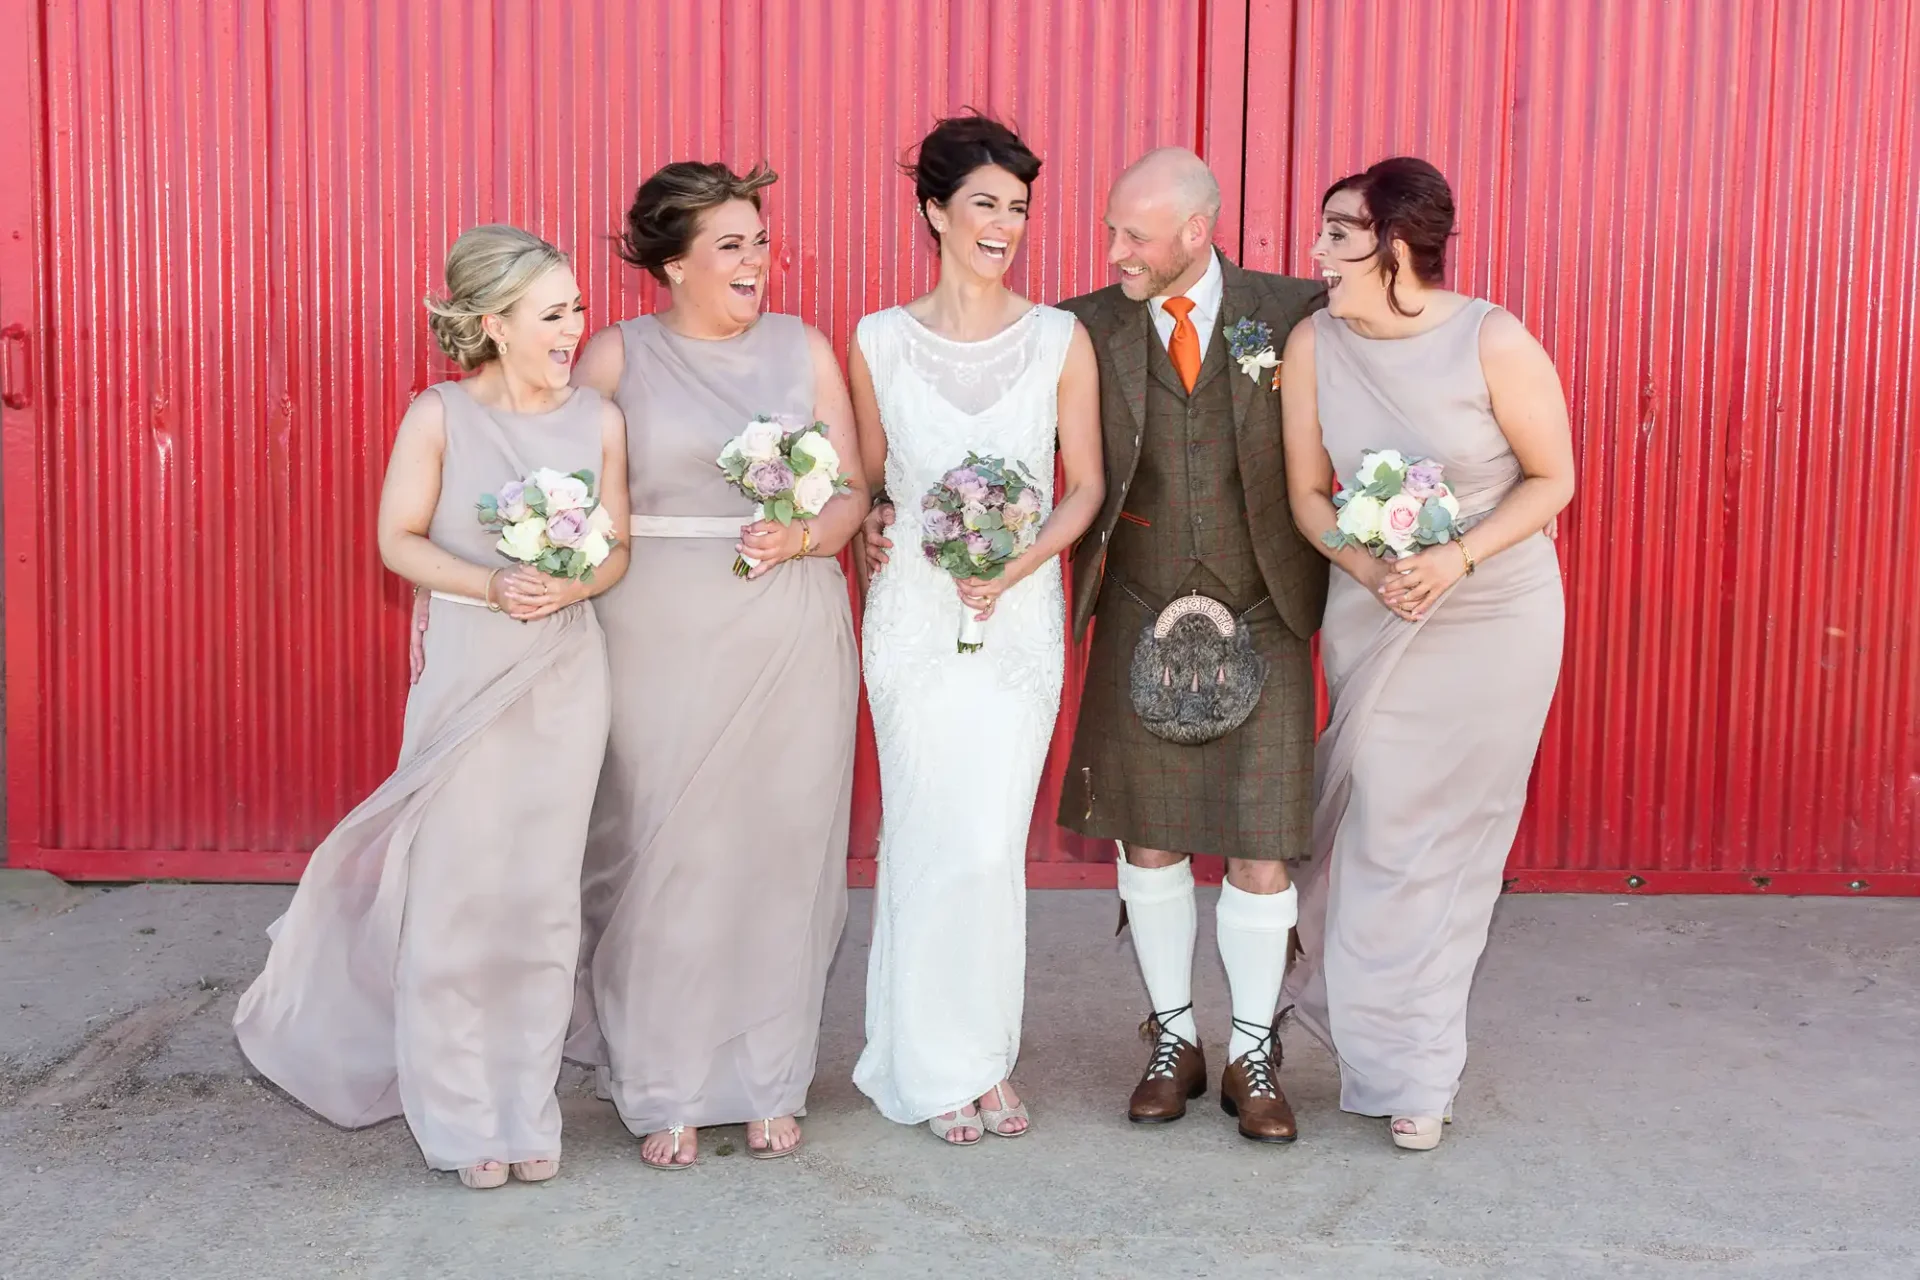 Bride and groom in traditional scottish attire laugh with three bridesmaids against a red background.